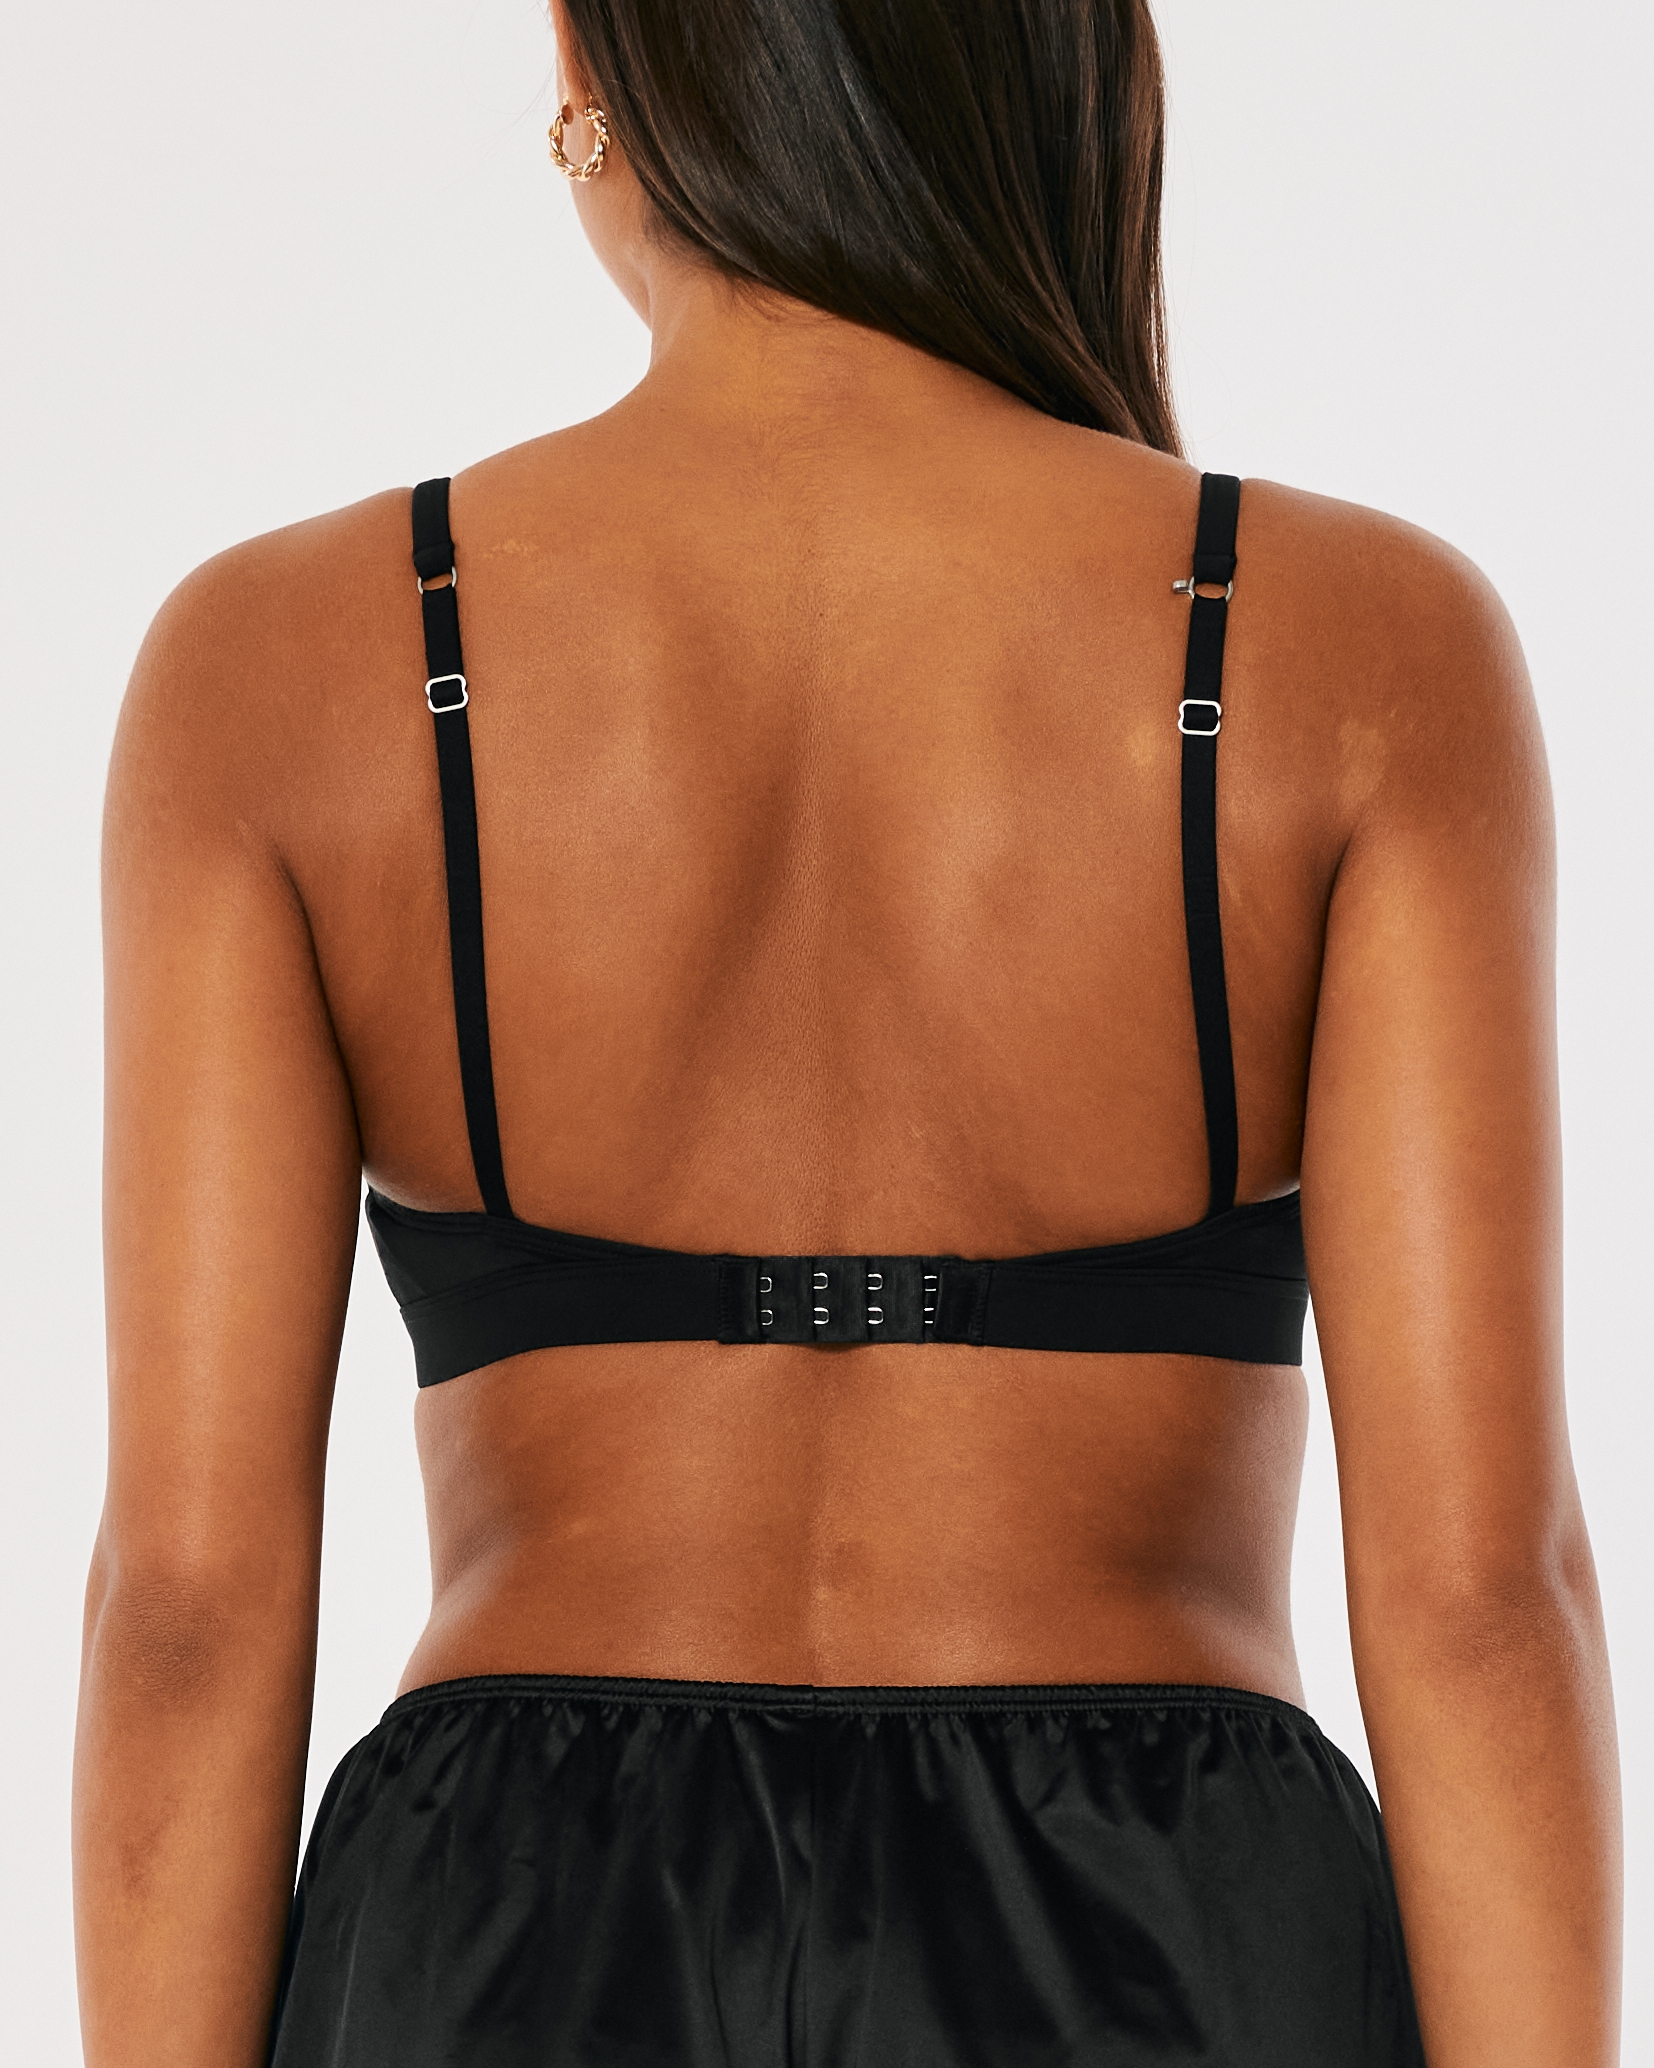 HOLLISTER/GILLY HICKS PADDED LACE BRALETTE — HOT